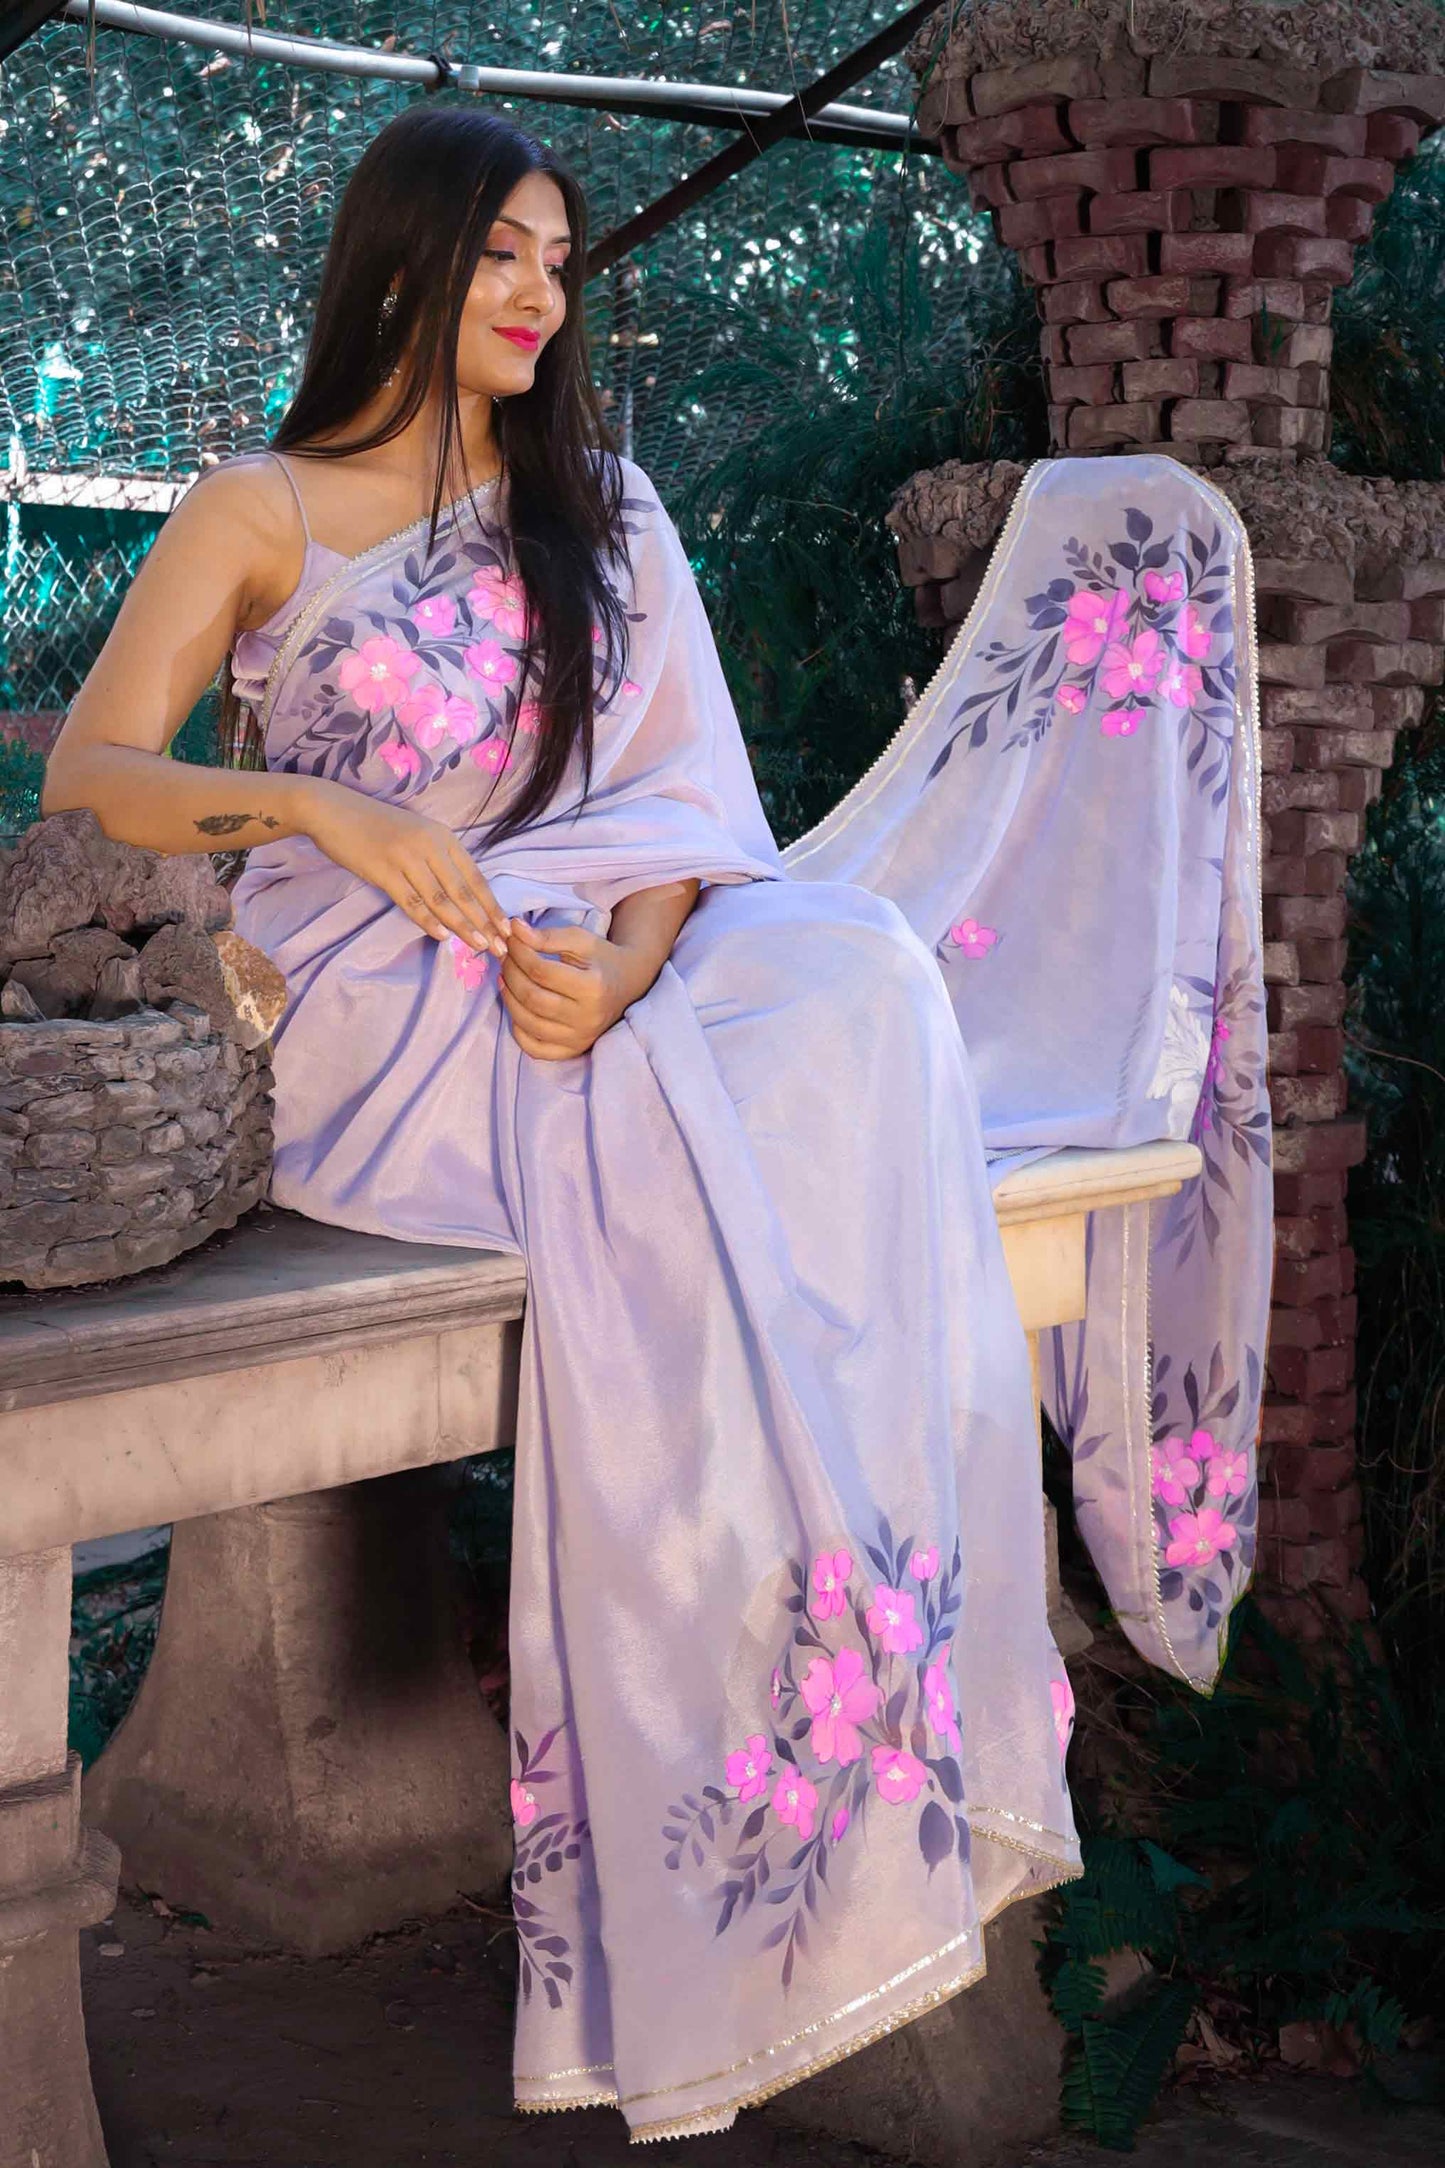 Hand-Painted Lavender Crepe Chiffon Saree with Fuchsia Flowers and Pigeons - Sequin and Bead Embroidery. Perfect for Party Wear, Engagement, or Farewell Saree Look. This Pure Silk Saree Features Exquisite Cloth Painting and Textile Paint for Fabric. Elevate Your Saree Style with Traditional and Stylish Indian Saree Design